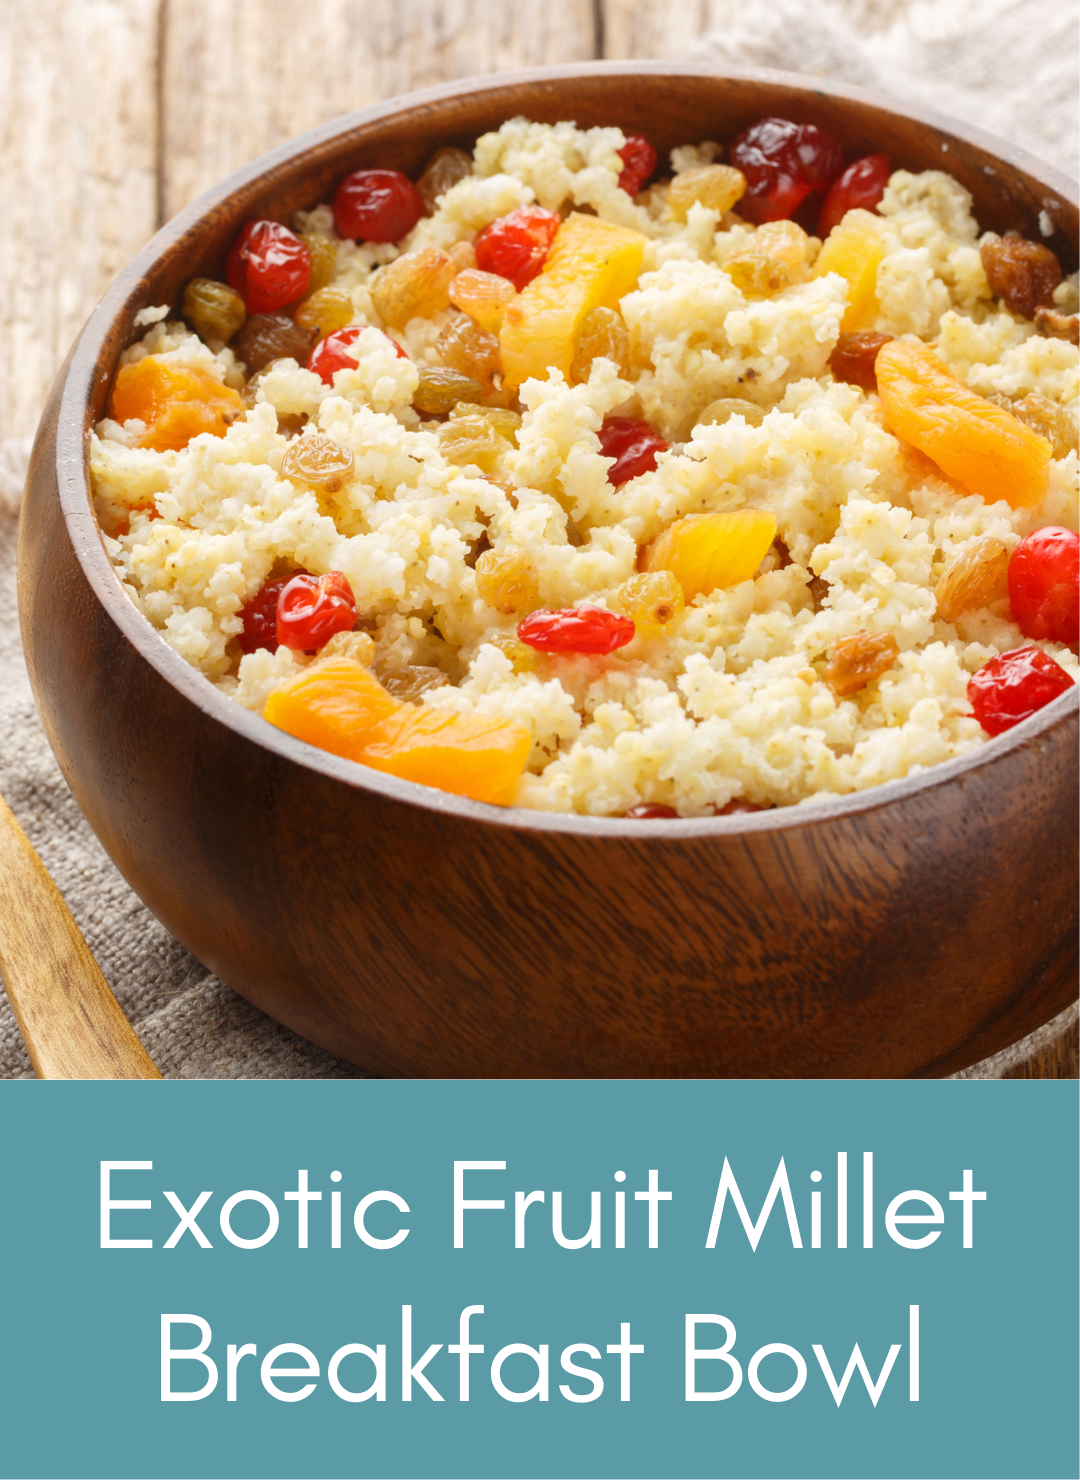 Exotic fruit millet breakfast bowl Picture with link to recipe